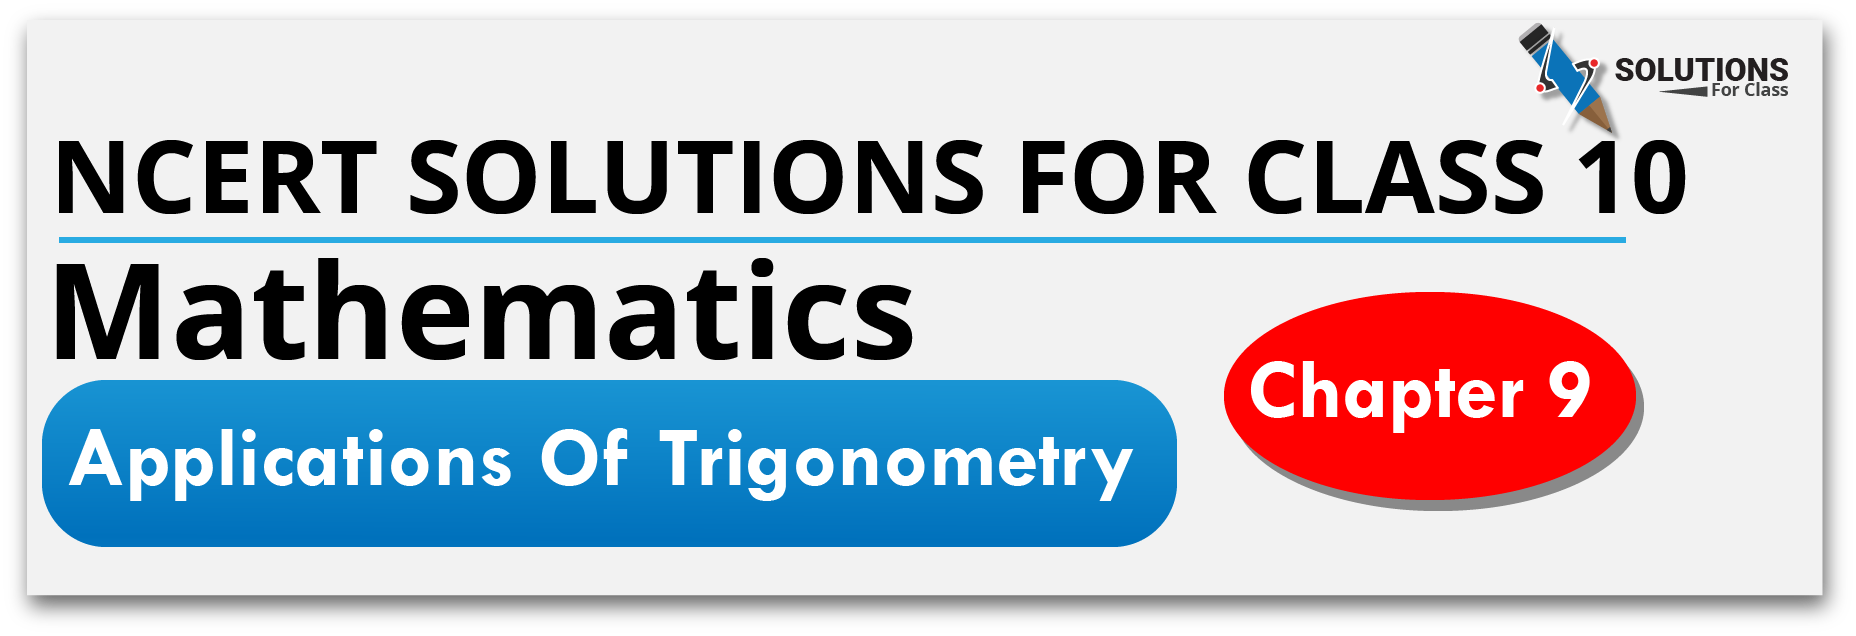 NCERT Solution For Class 10, Maths, Chapter 9, Applications Of Trigonometry